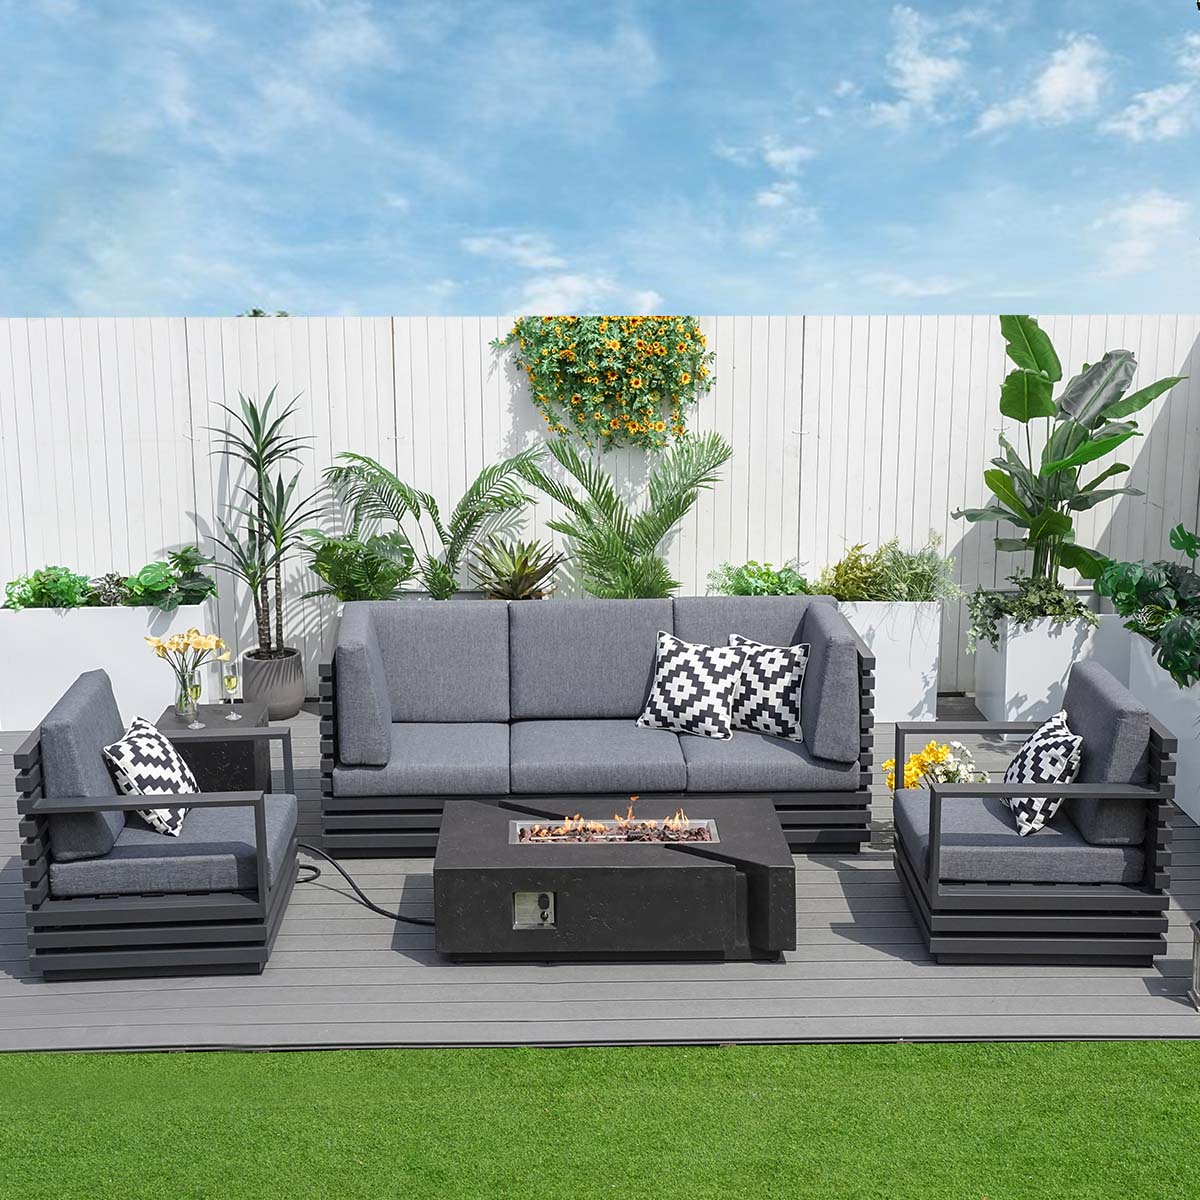 The latest furniture on the market - Abrihome 4-Pieces Patio Garden Aluminum Seating Set with Fire Pit